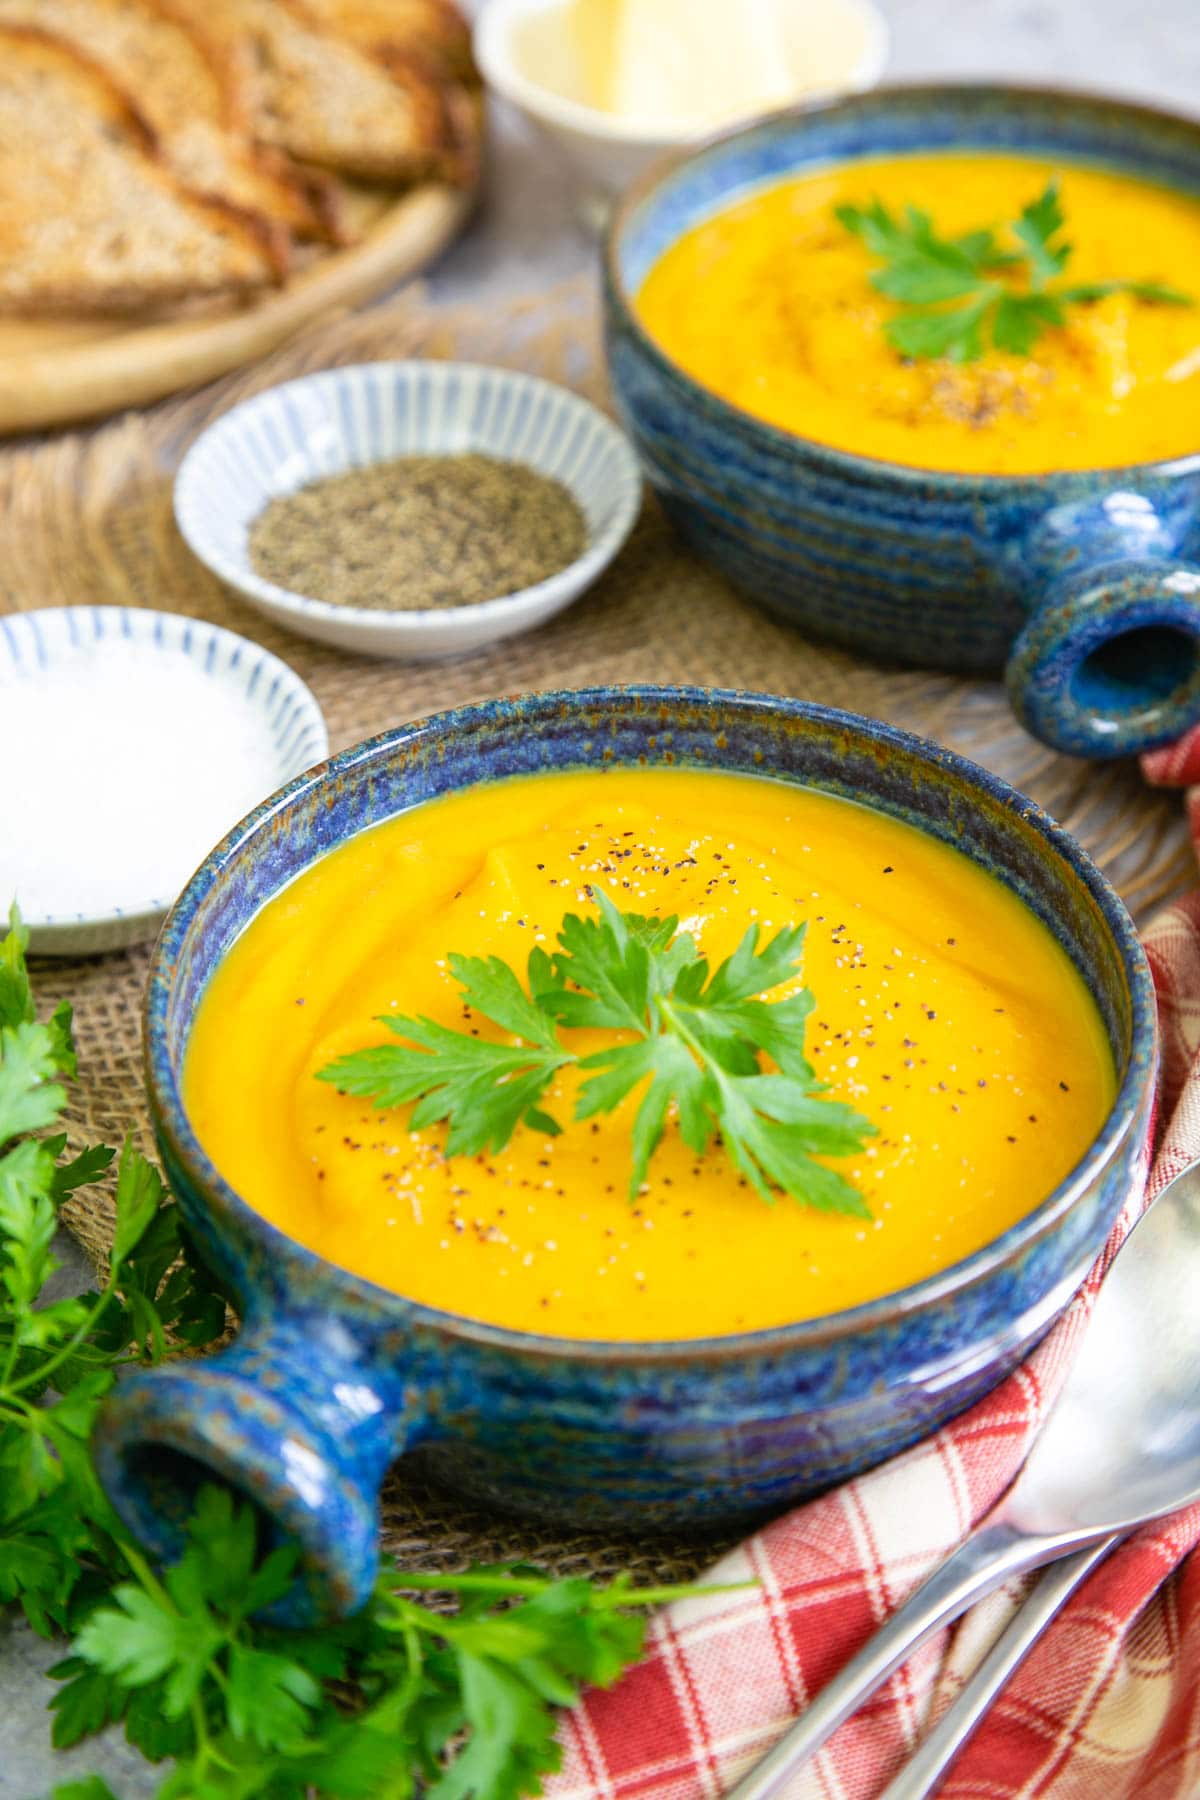 An inviting bowl of golden parsnip and carrot soup, garnished with fresh parsley